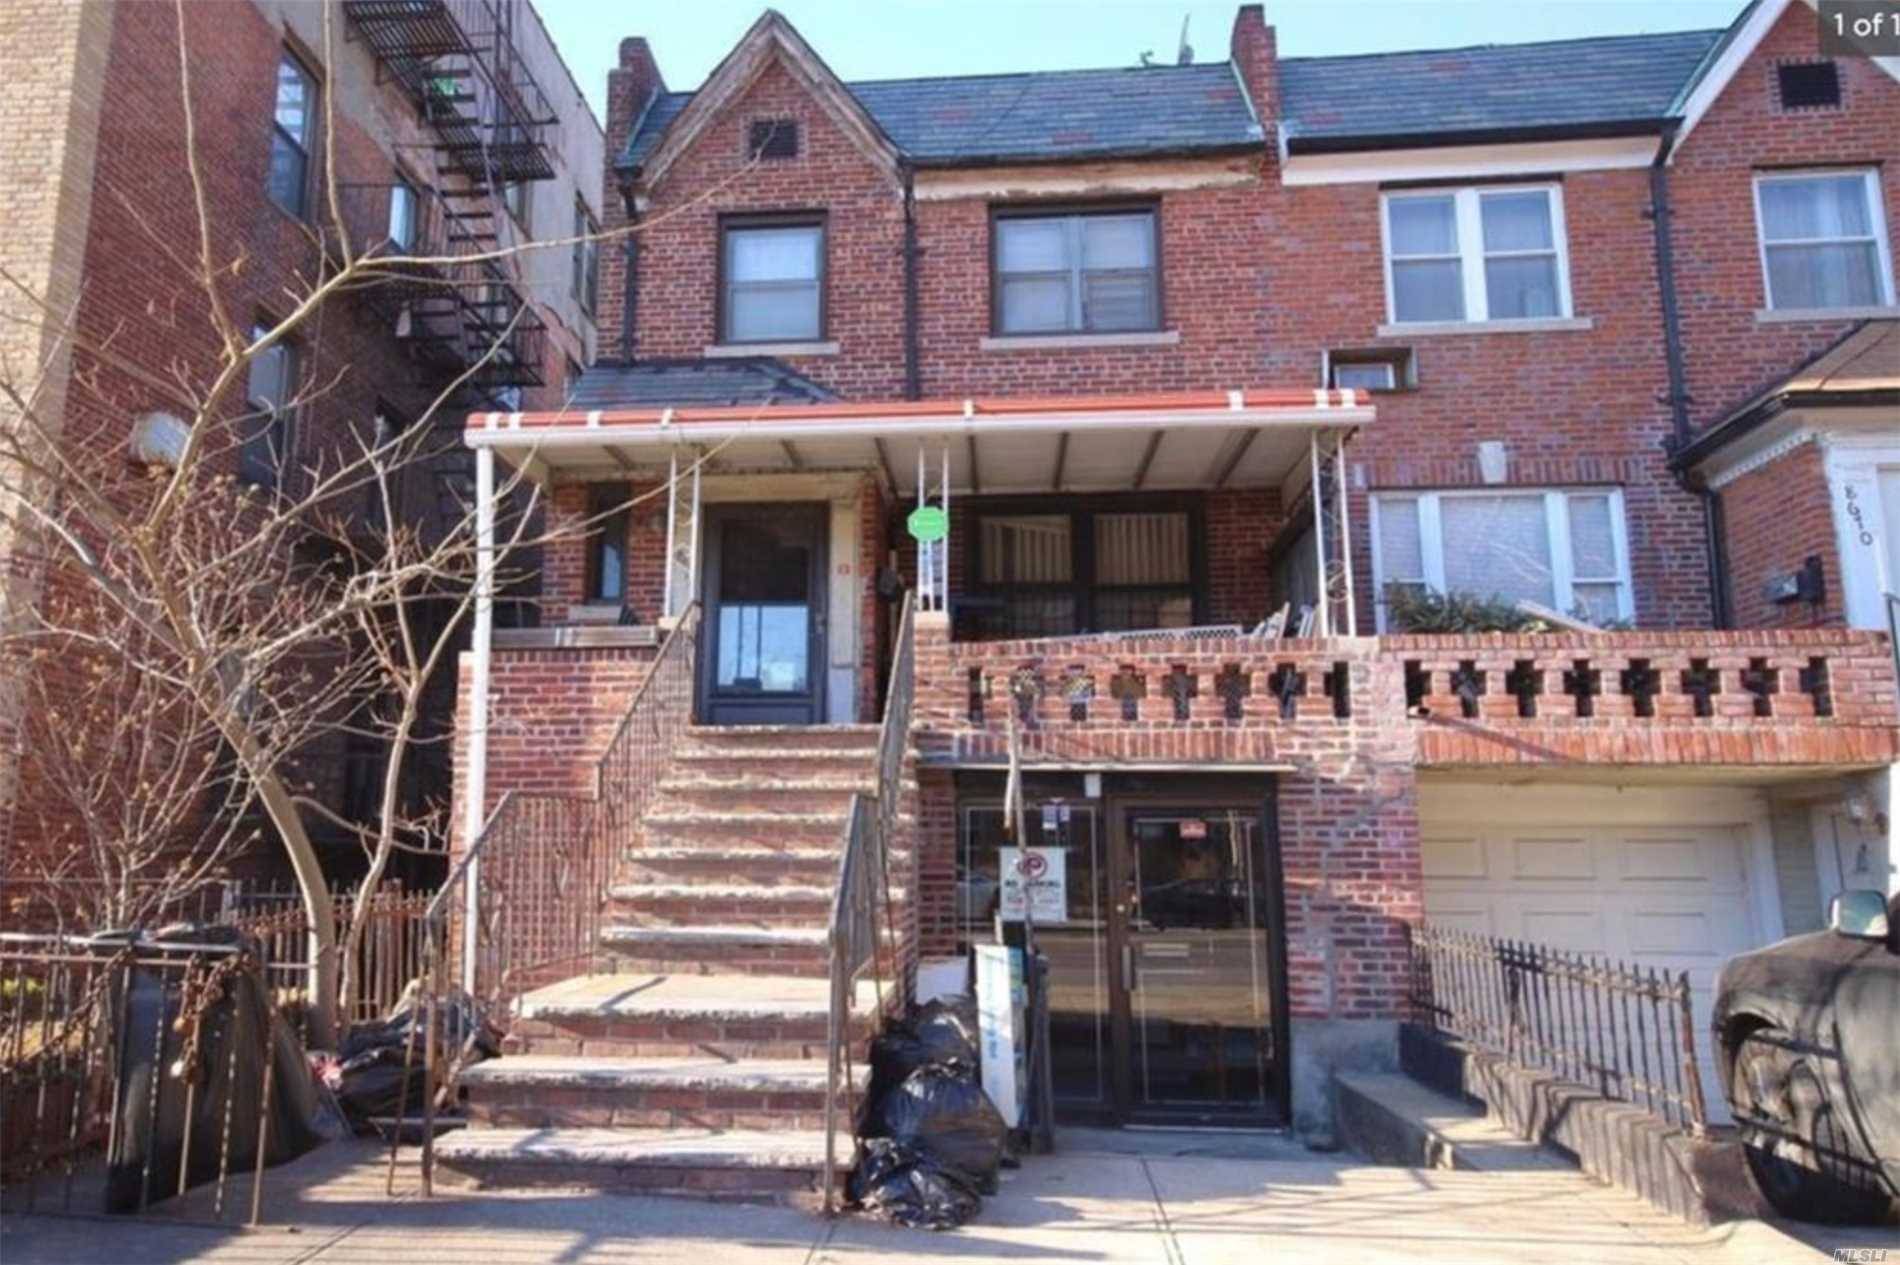 Great Development Investment property located in the heart of Bensonhurst.